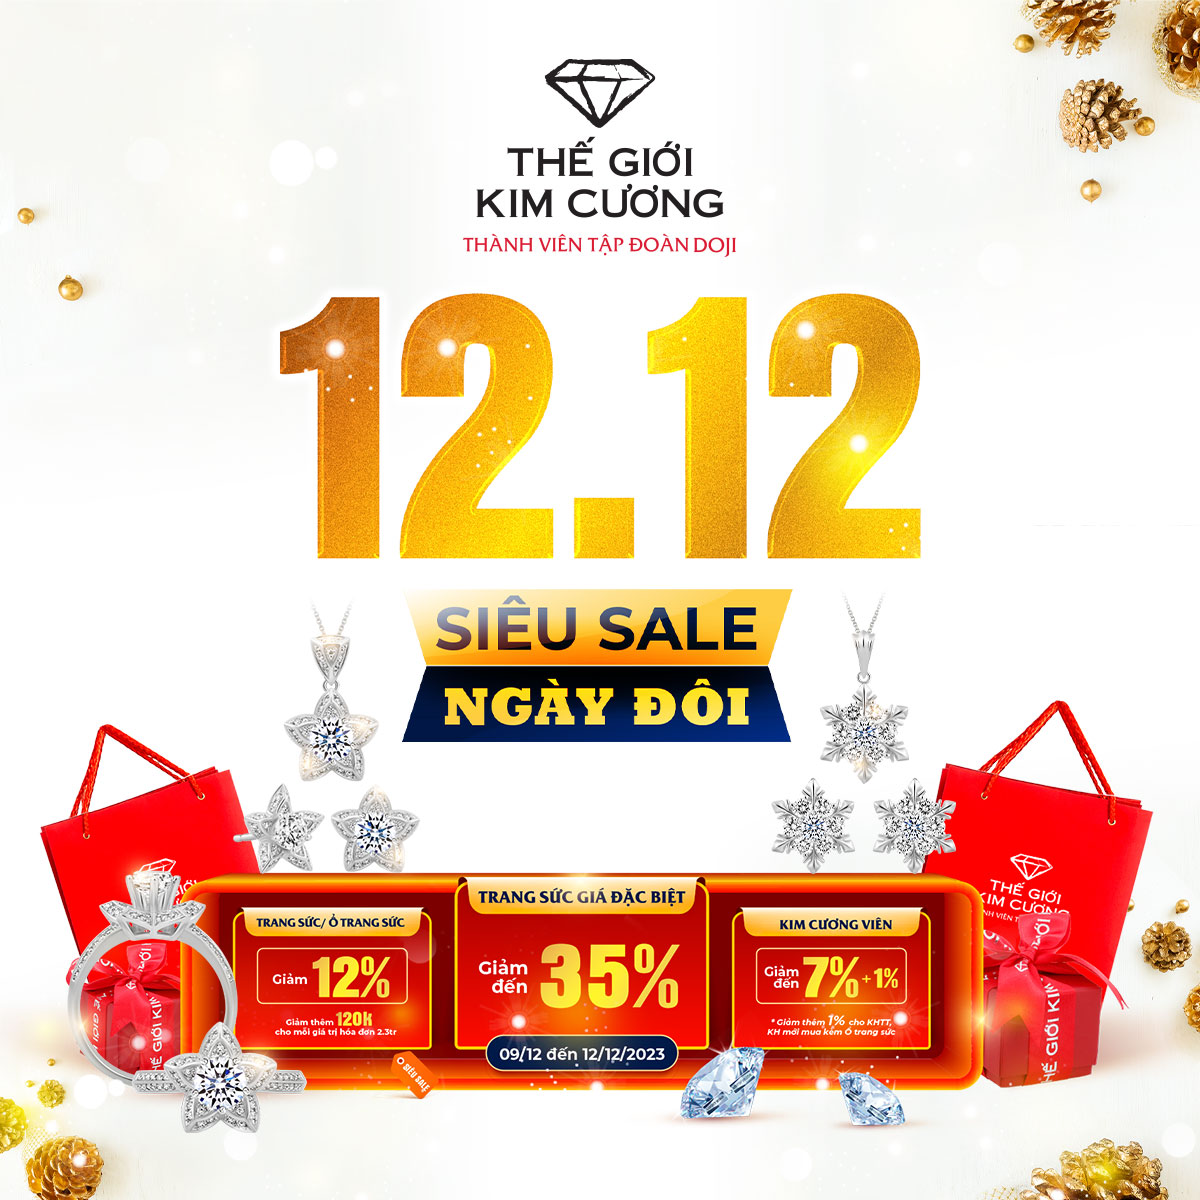 12/12 DOUBLE DAY - DOUBLE SALE